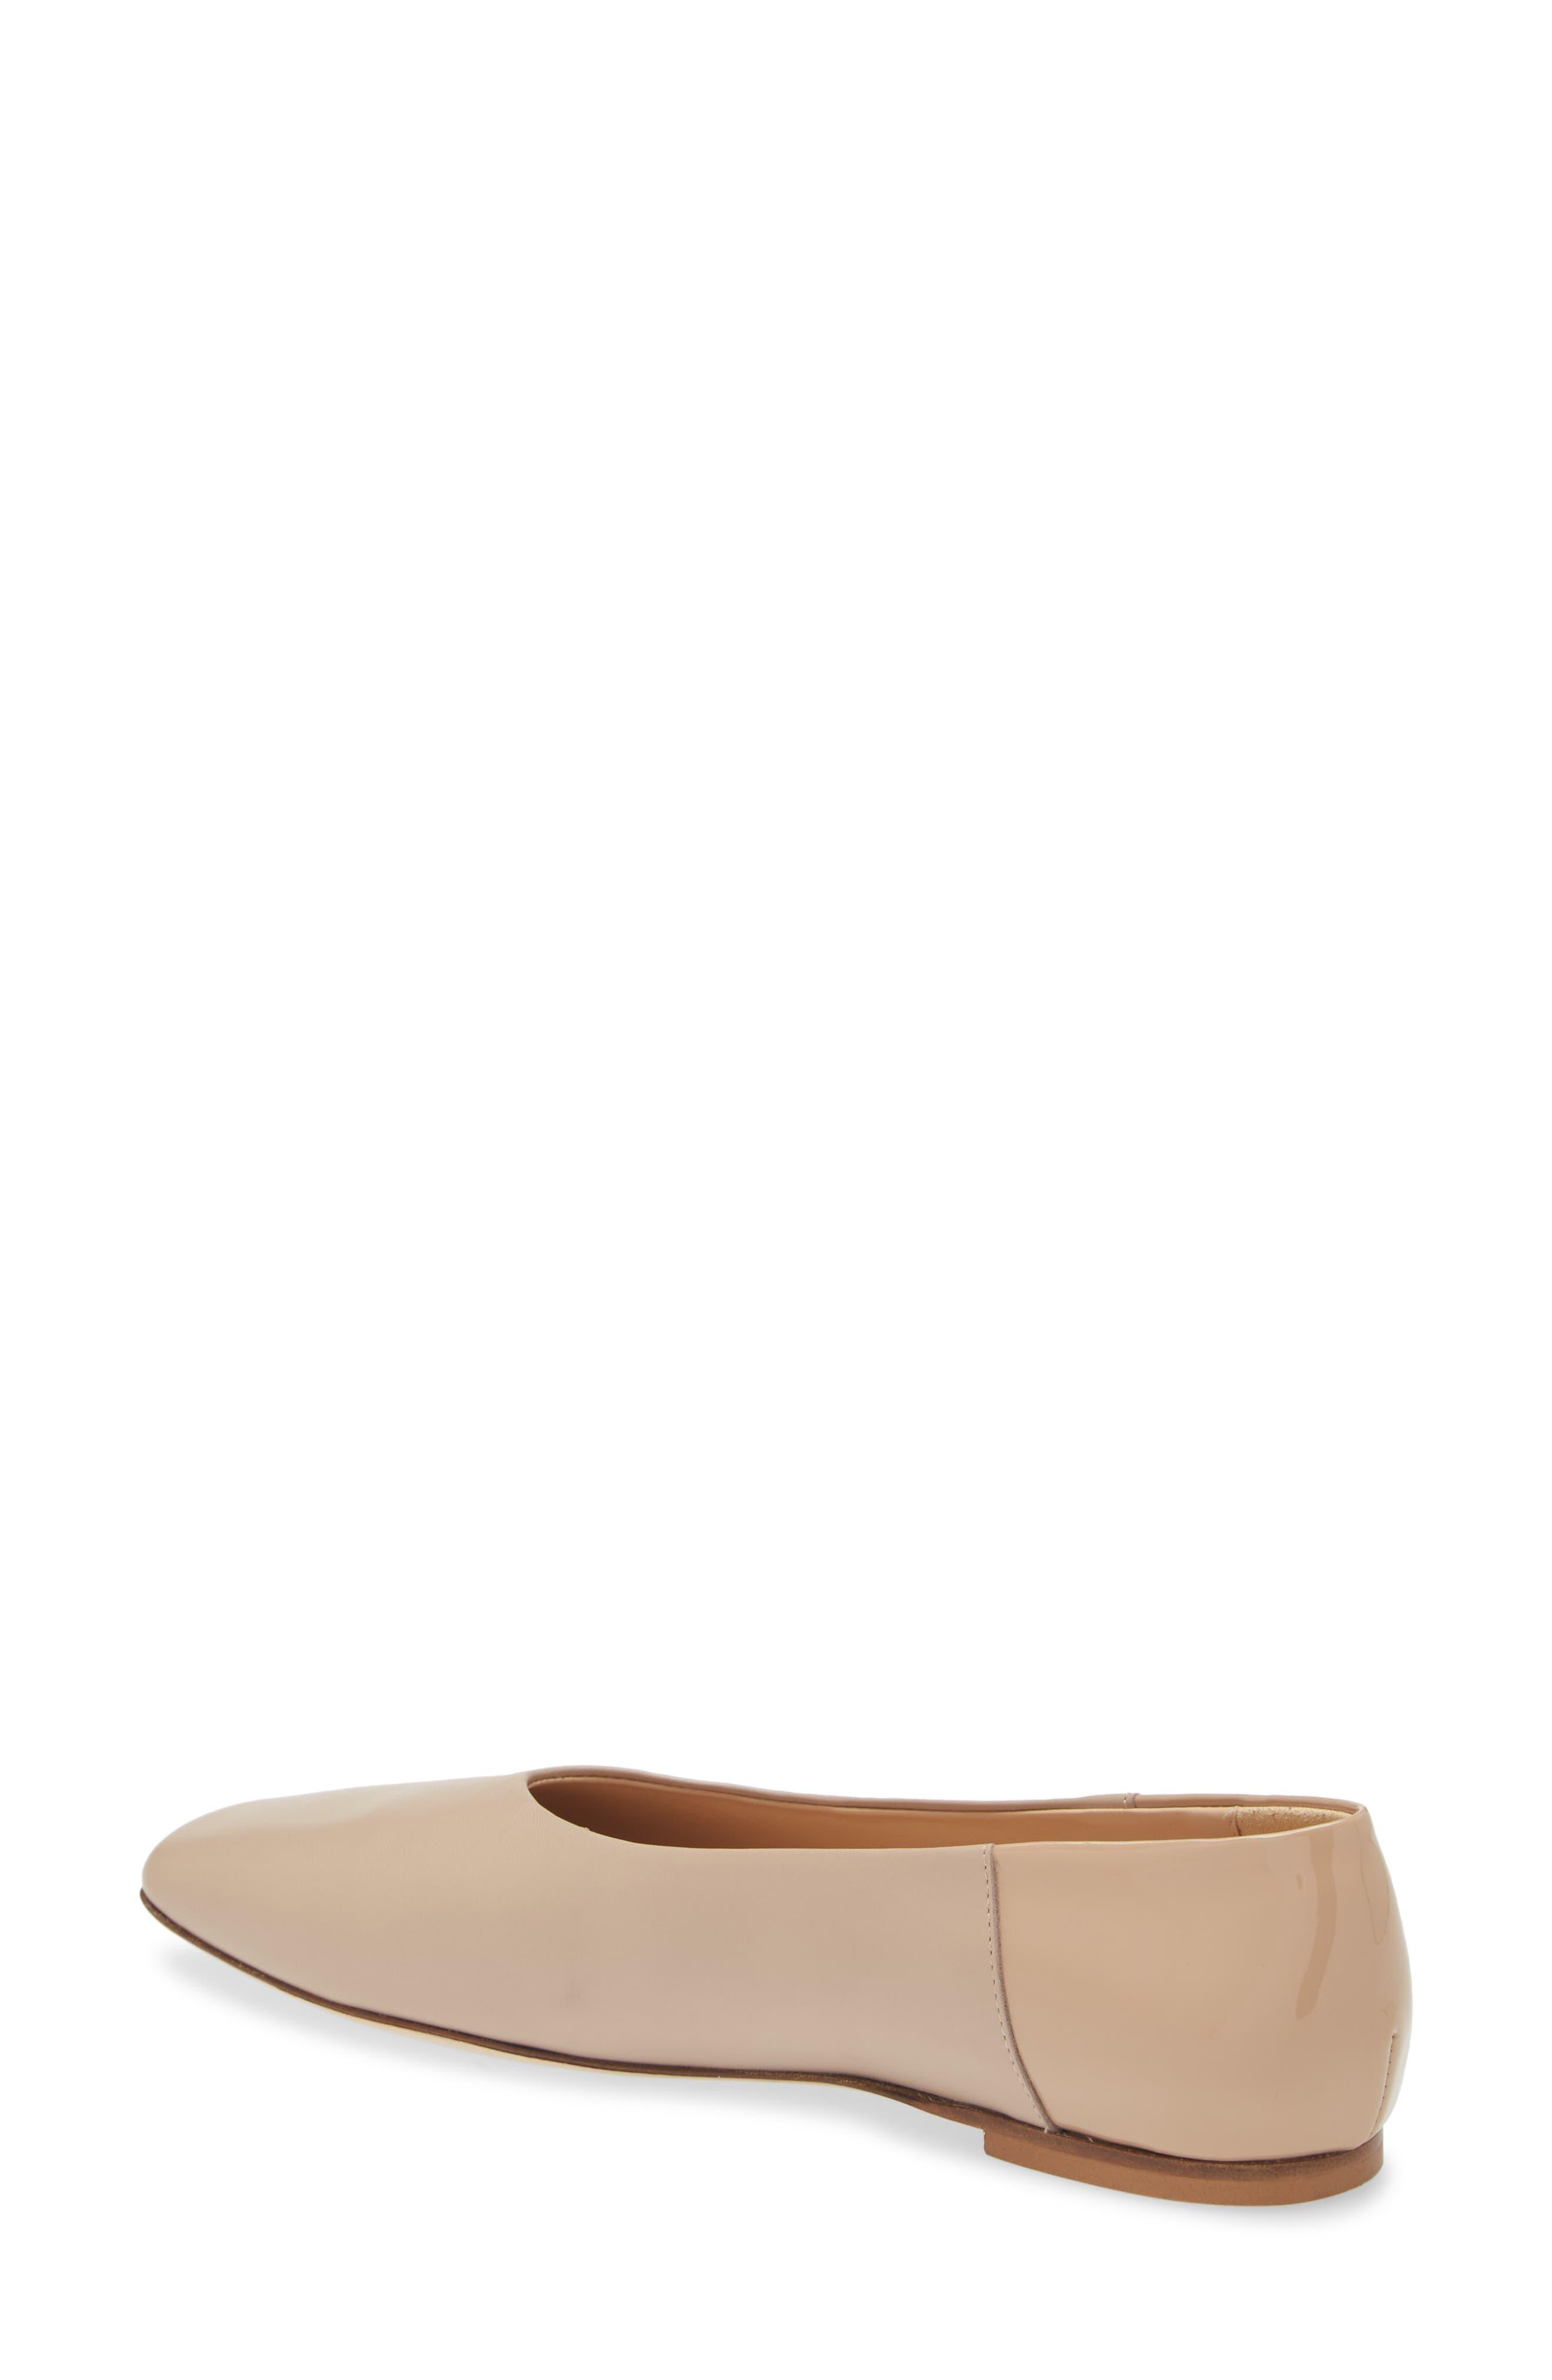 Bells & Becks Cellina Flat in Natural | Lyst